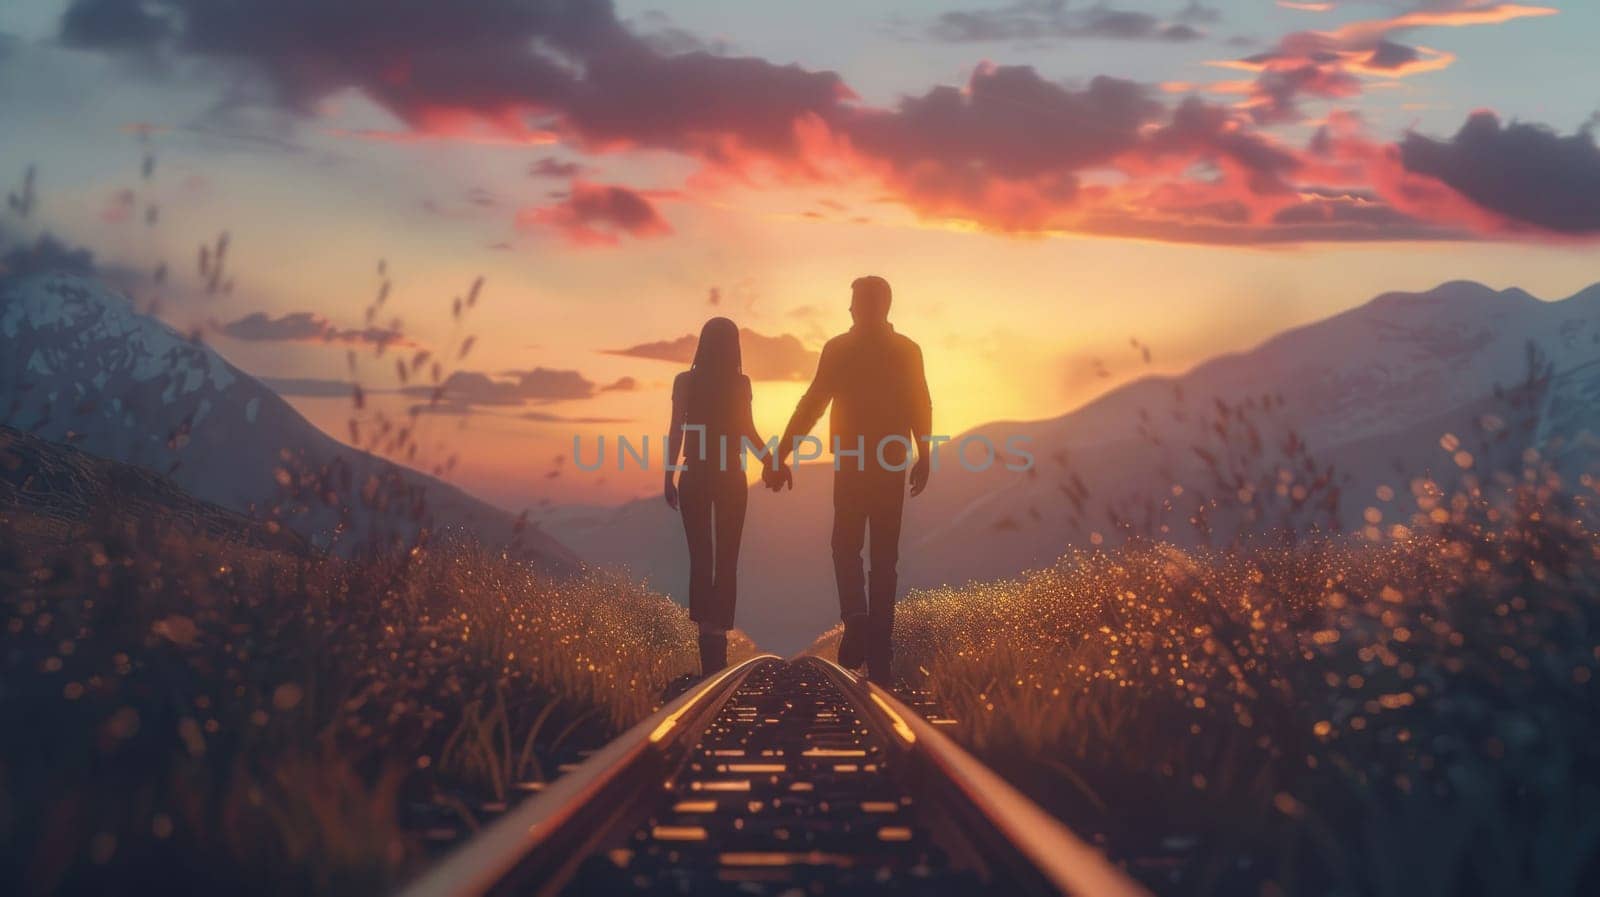 Traveling into the sunset a man and woman walking on railroad tracks with mountains in background by Vichizh